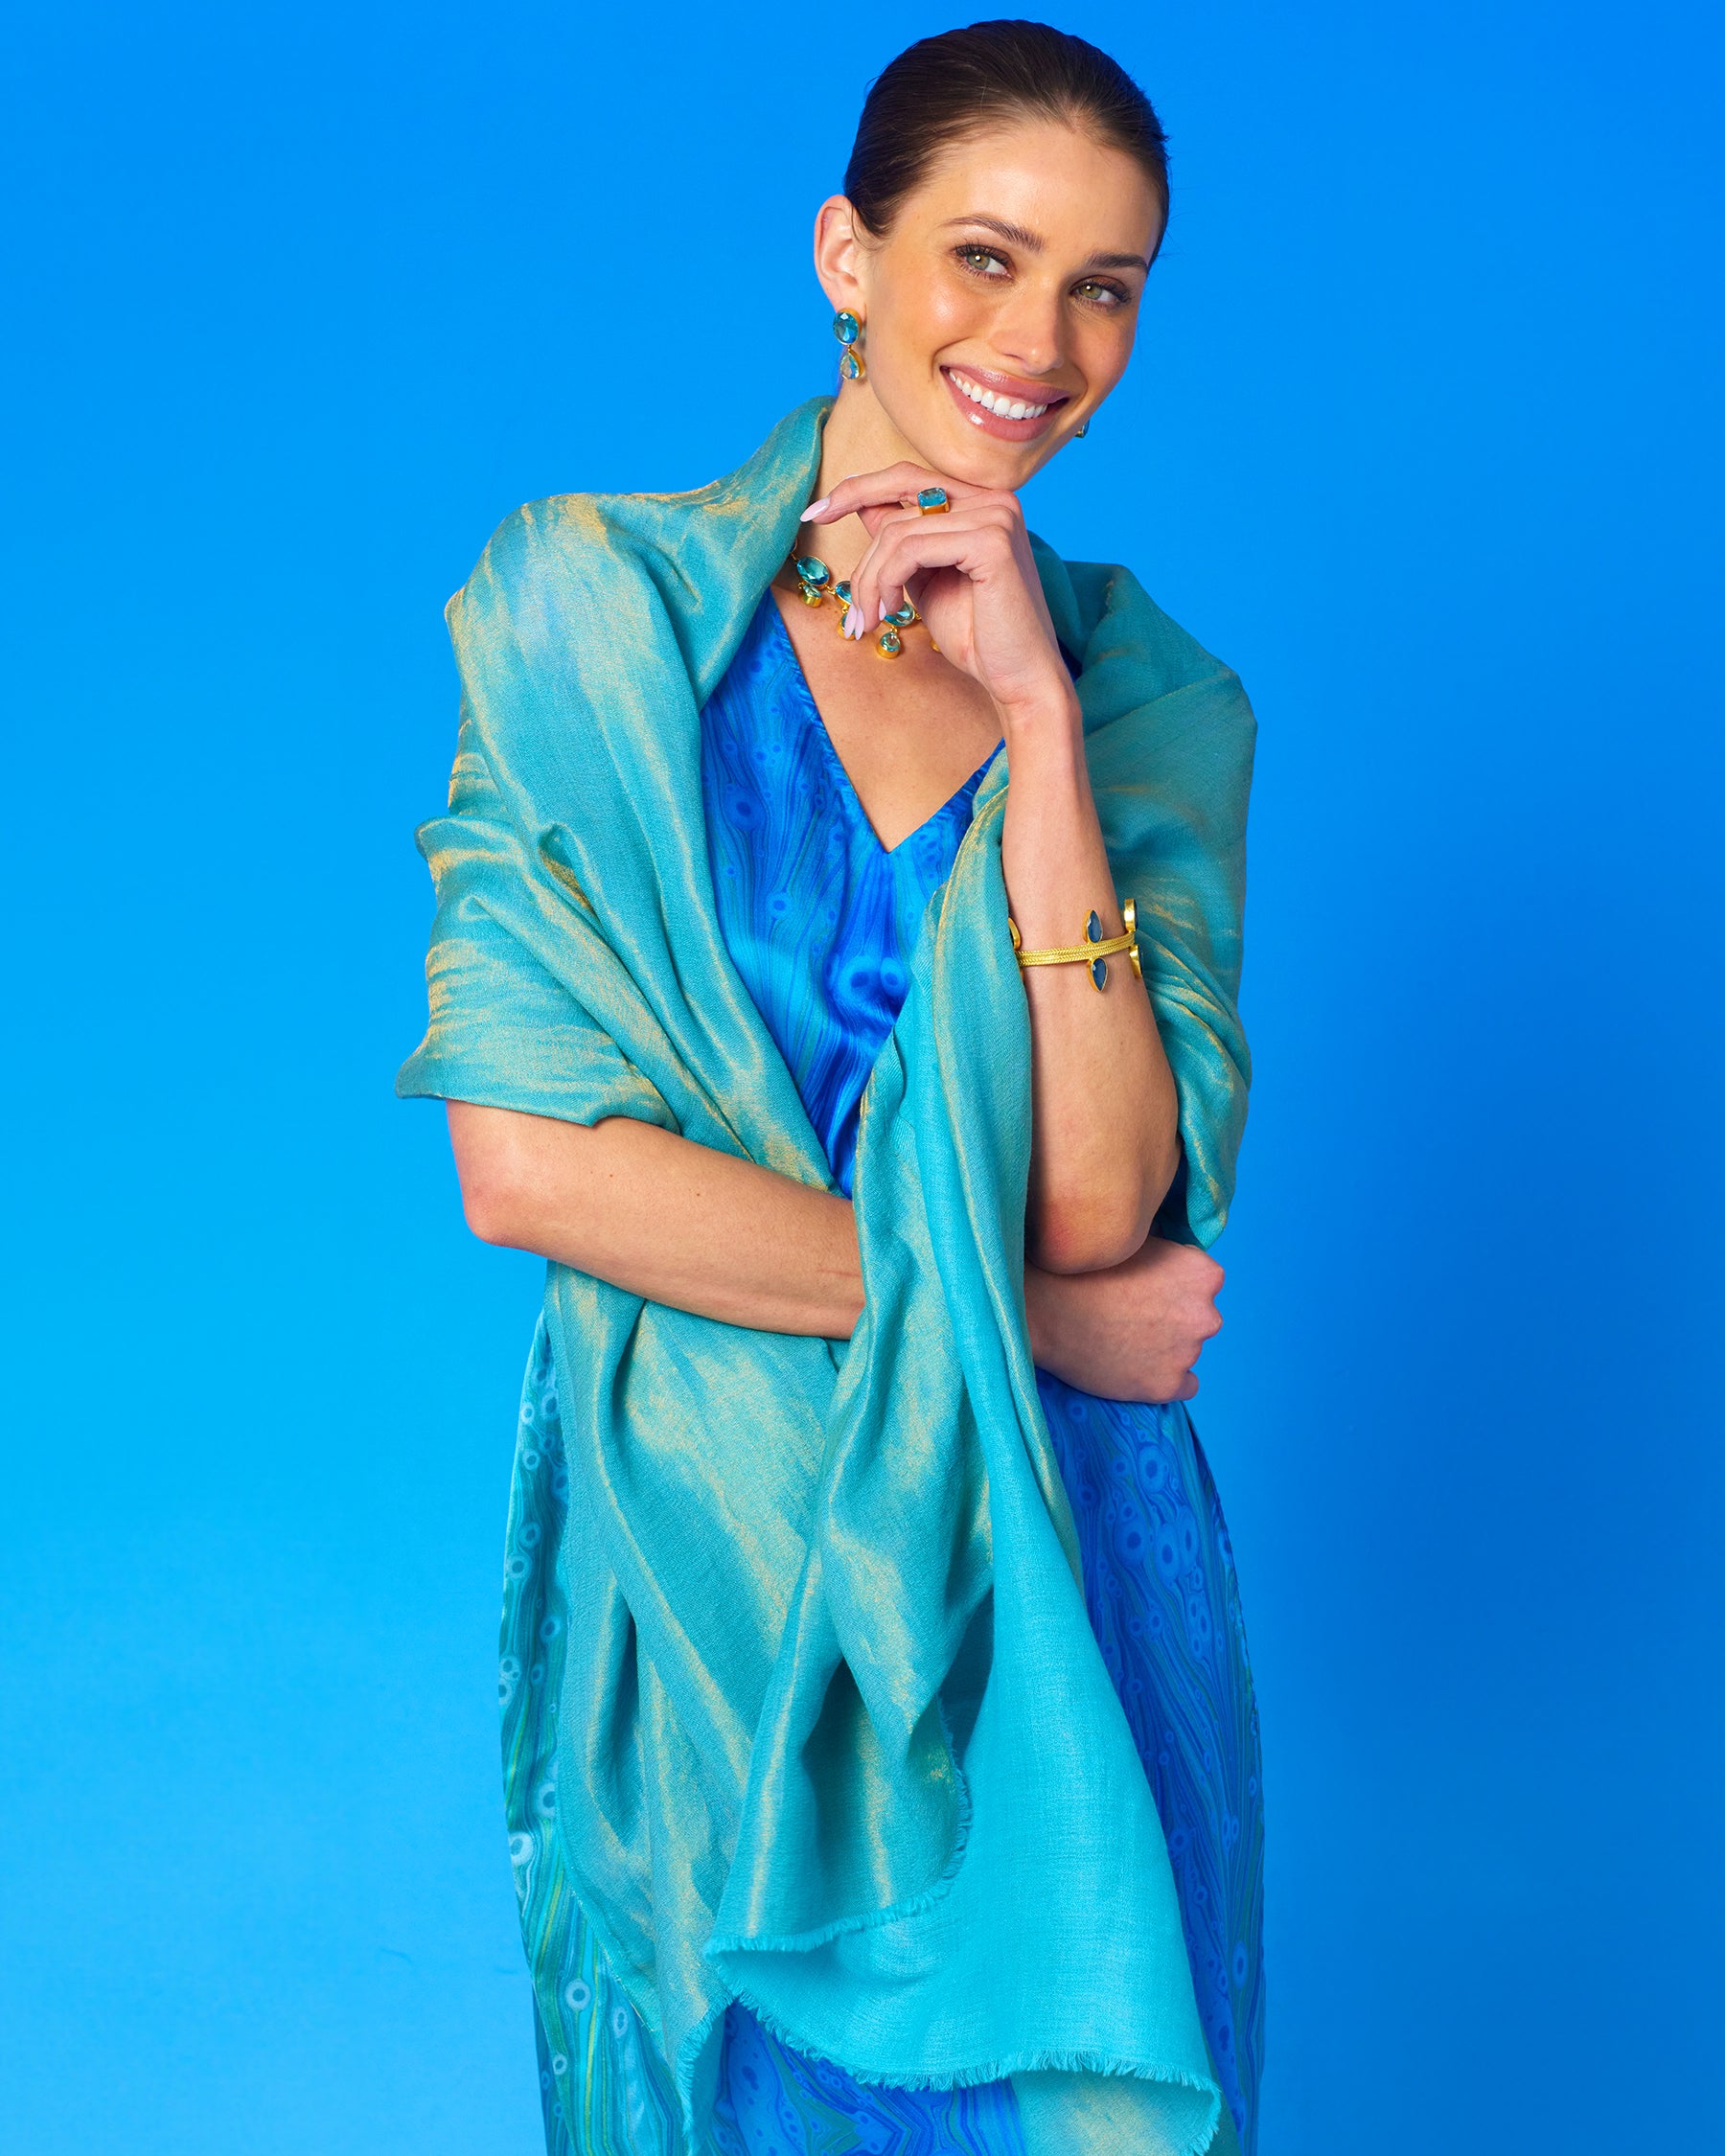 Josephine Reversible Pashmina Shawl in Gold Shimmer Turquoise worn with the Calliope Long Silk Dress